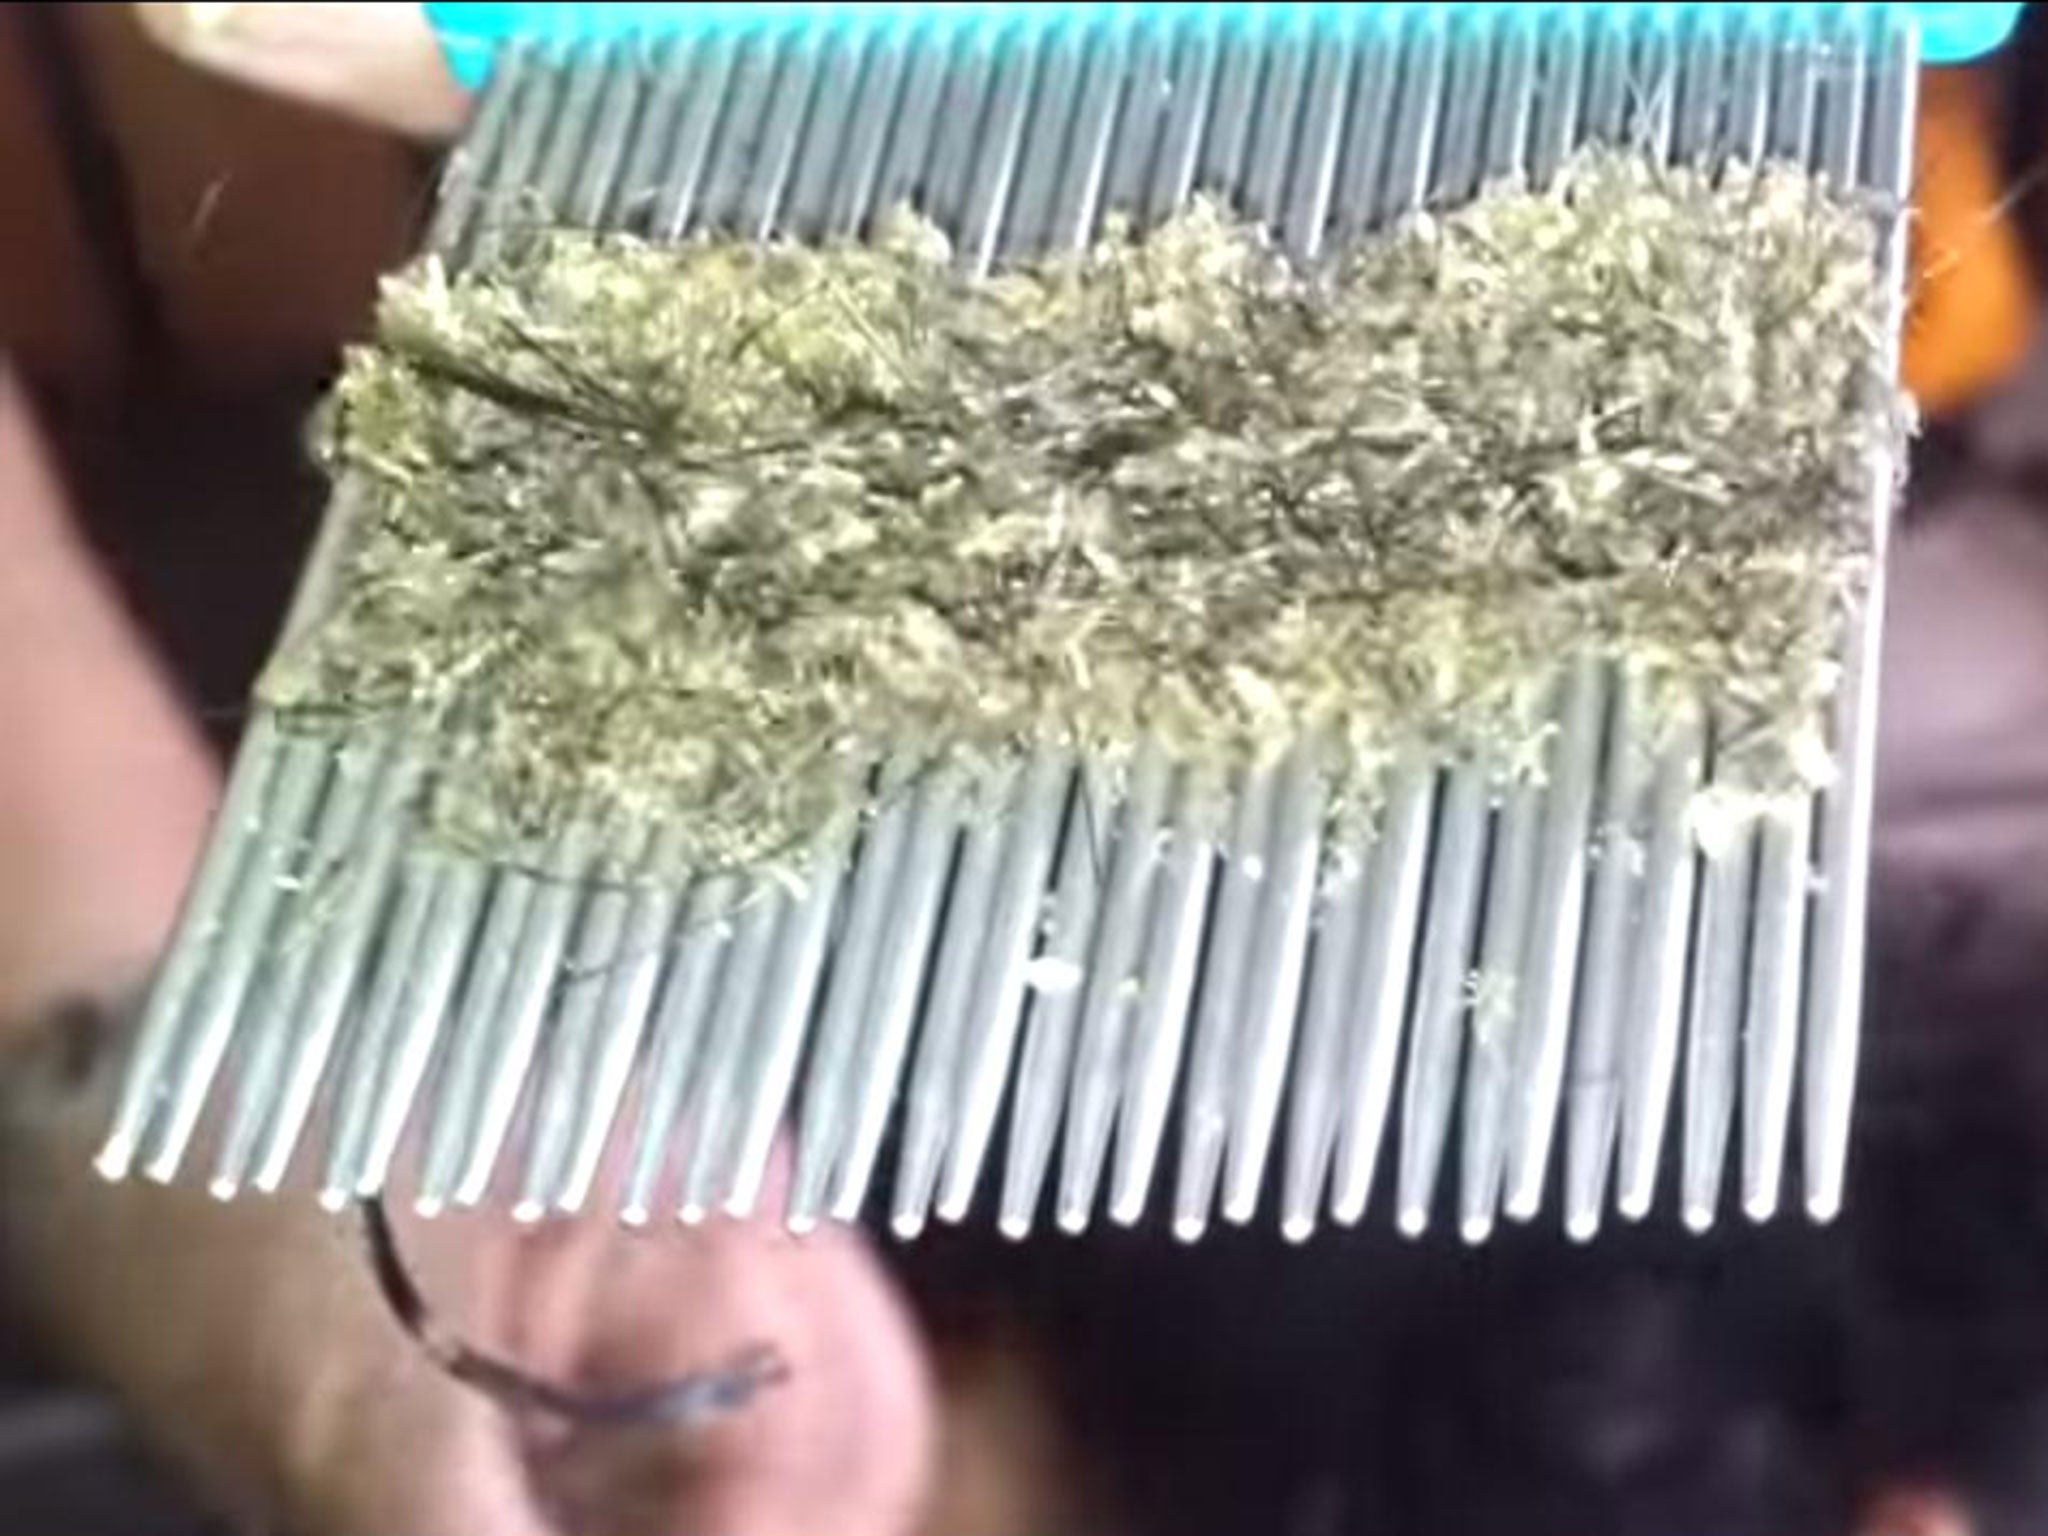 Video of horrifying head lice infestation shows hundreds of nits on a comb  | The Independent | The Independent